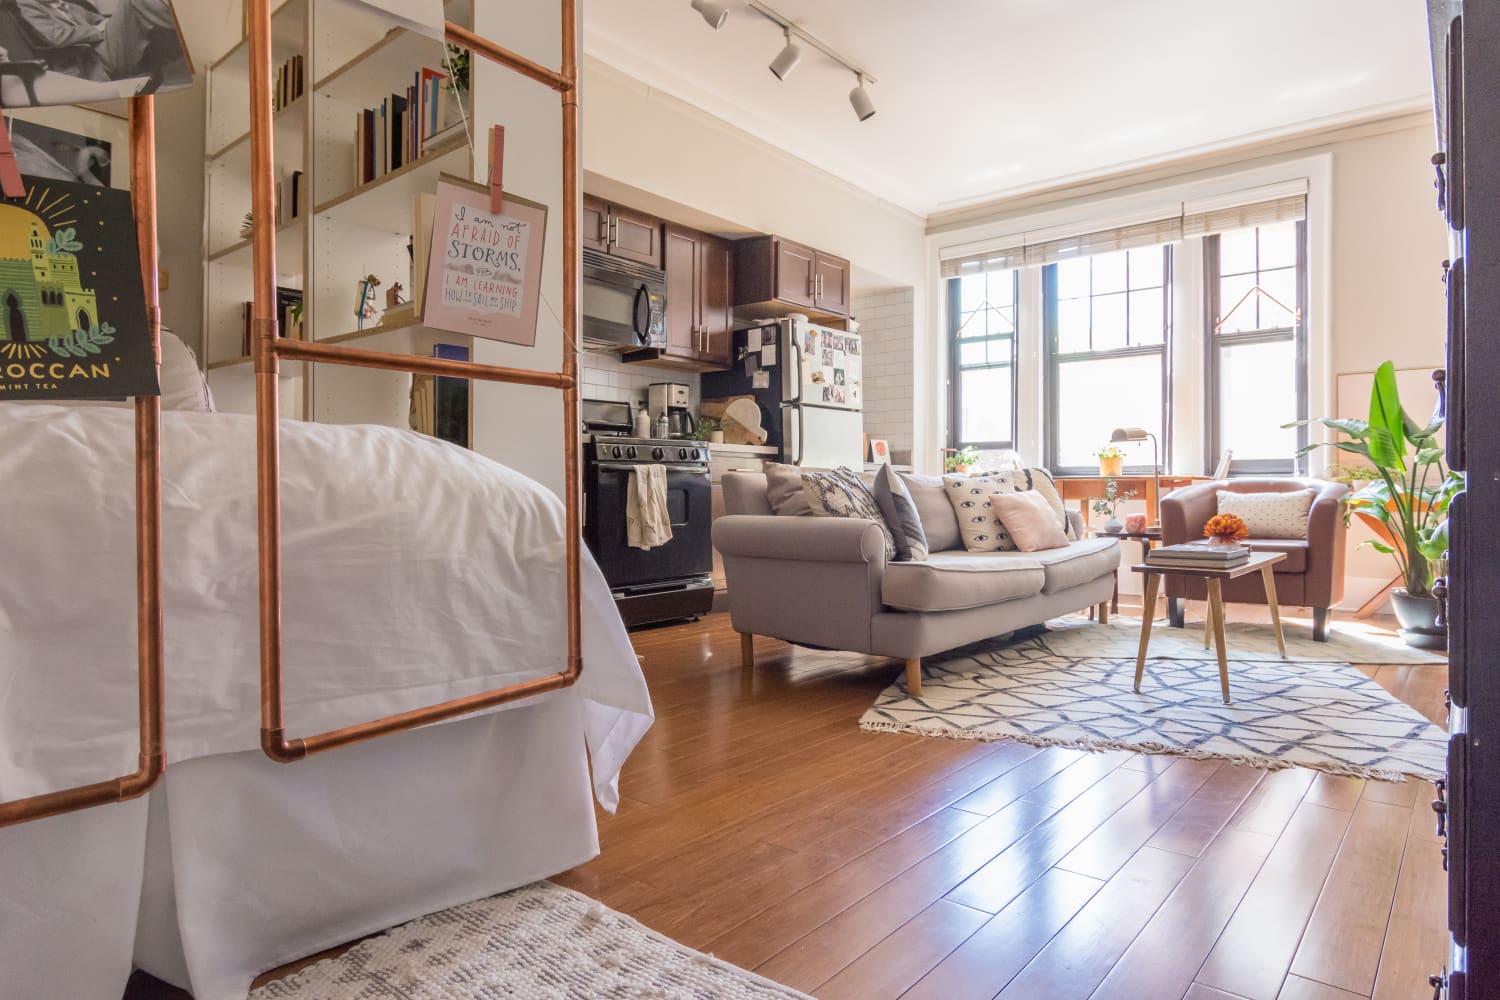 house-tour-a-cute-400-square-foot-chicago-studio-apartment-therapy